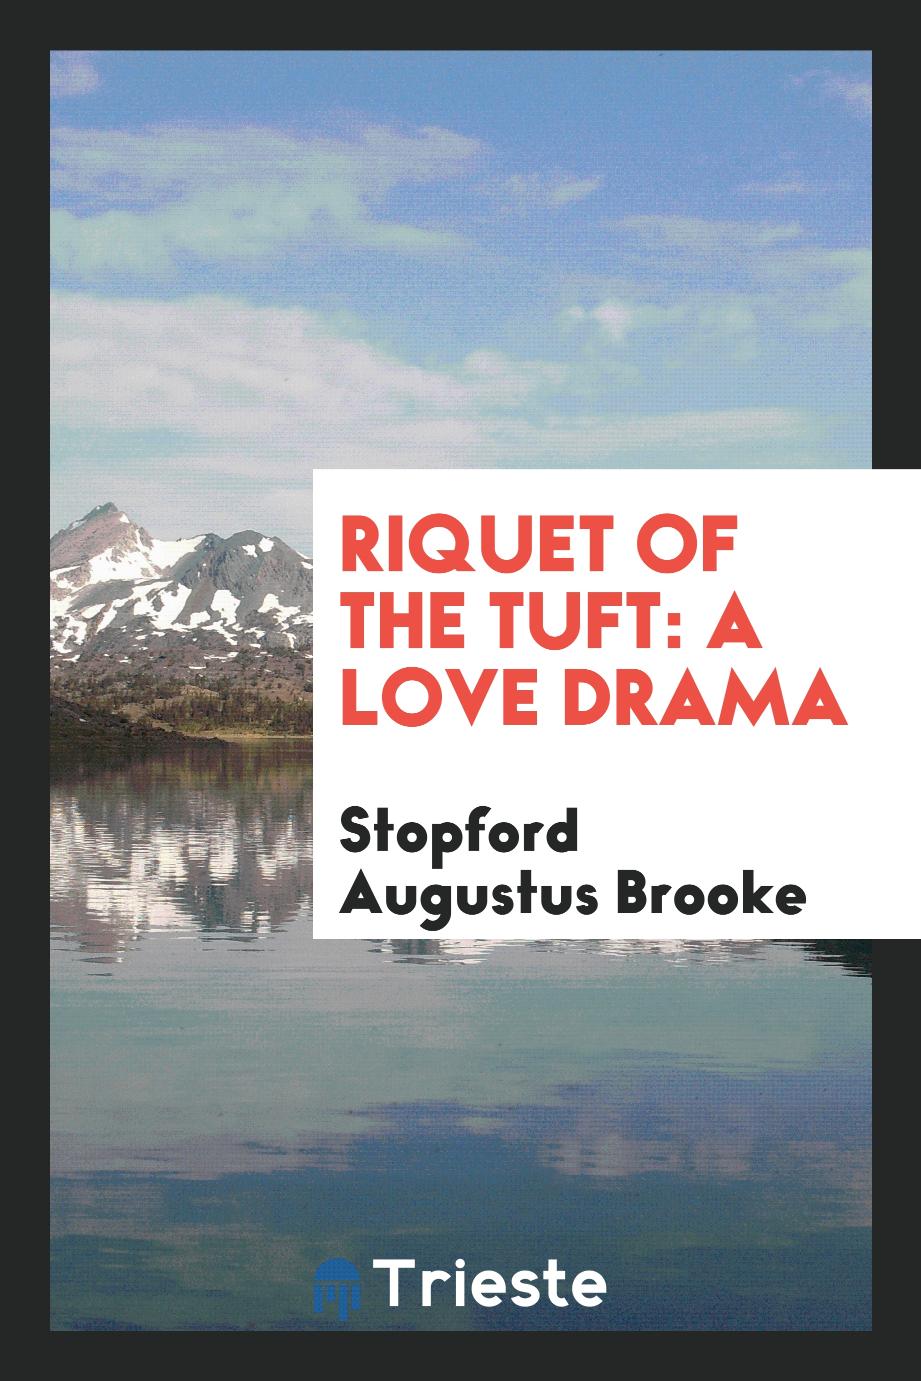 Riquet of the Tuft: A Love Drama